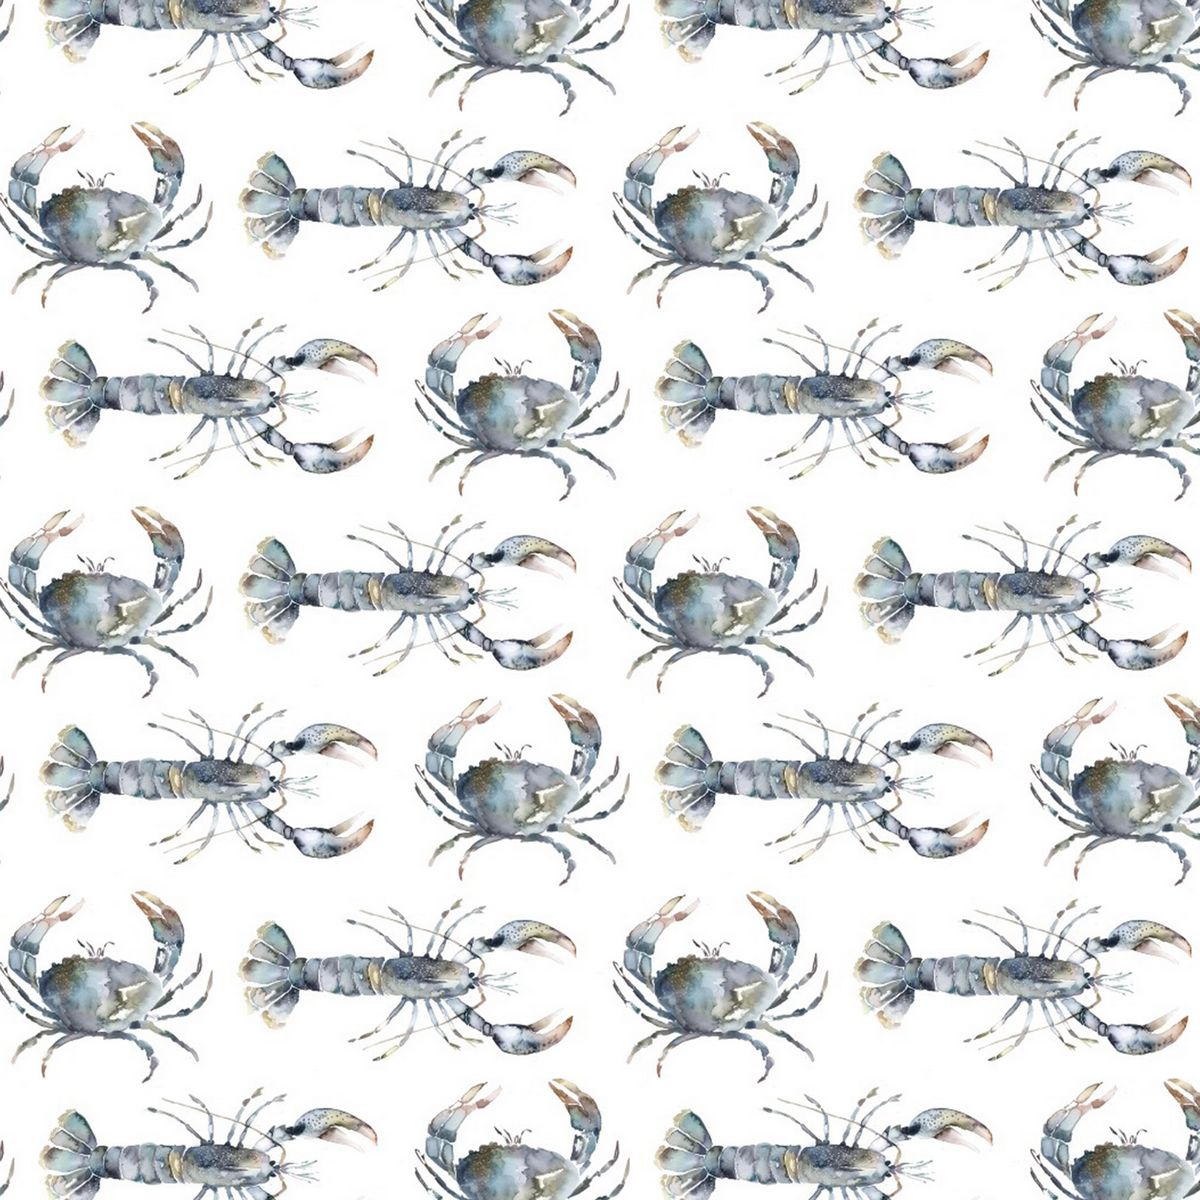 Crustaceans Slate Fabric by Voyage Maison